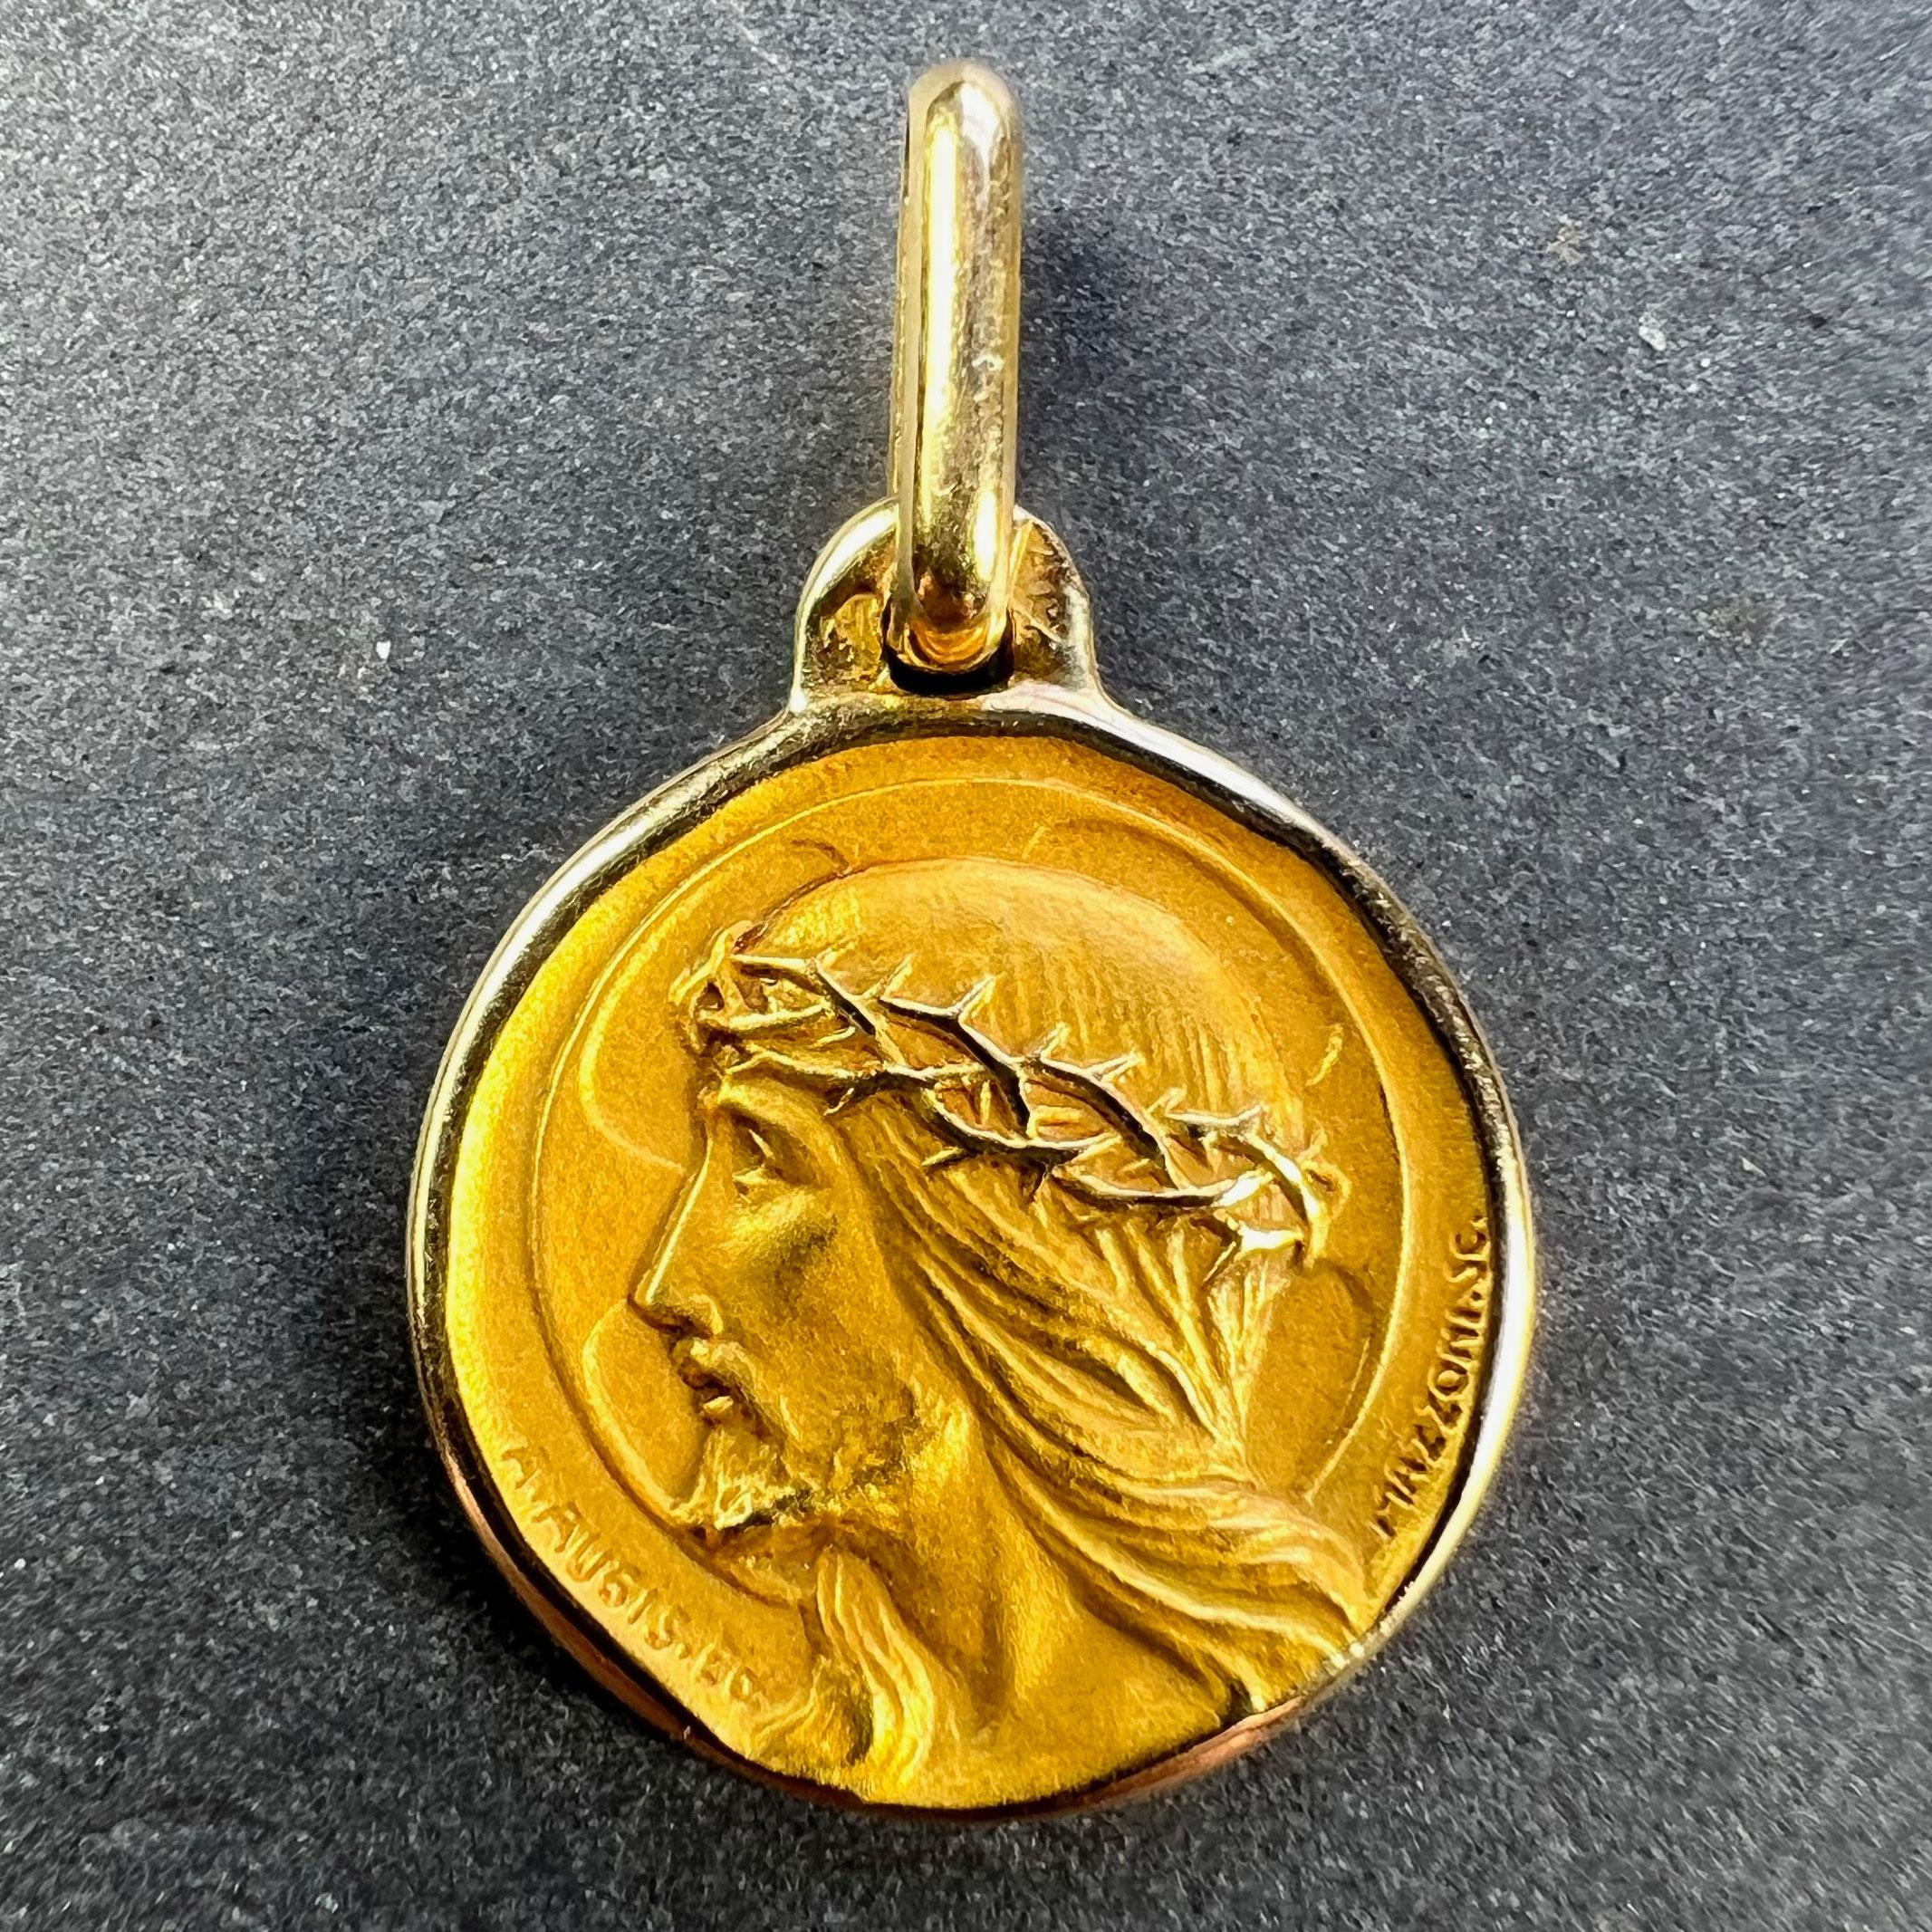 A French 18 karat (18K) yellow gold charm pendant designed as a round medal depicting the profile of Jesus Christ wearing the Crown of Thorns, in front of a halo shaped like a cross. Signed A.Augis and Mazzoni. Stamped with the eagle’s head for 18